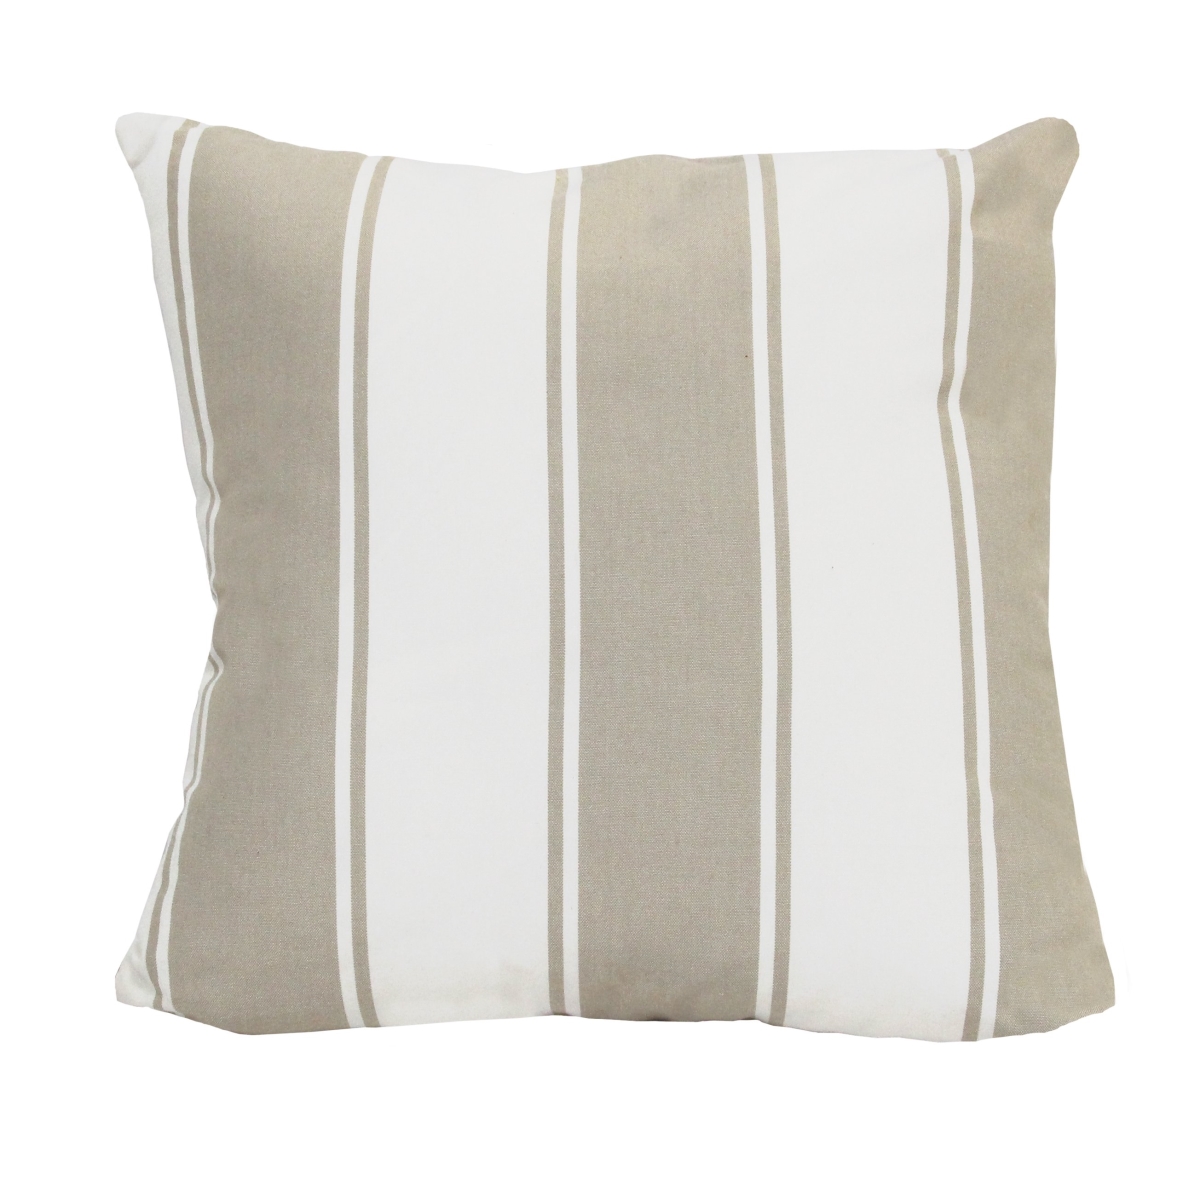 Home Roots Beddings 331467 Stylish Stripe Pillow, Beige